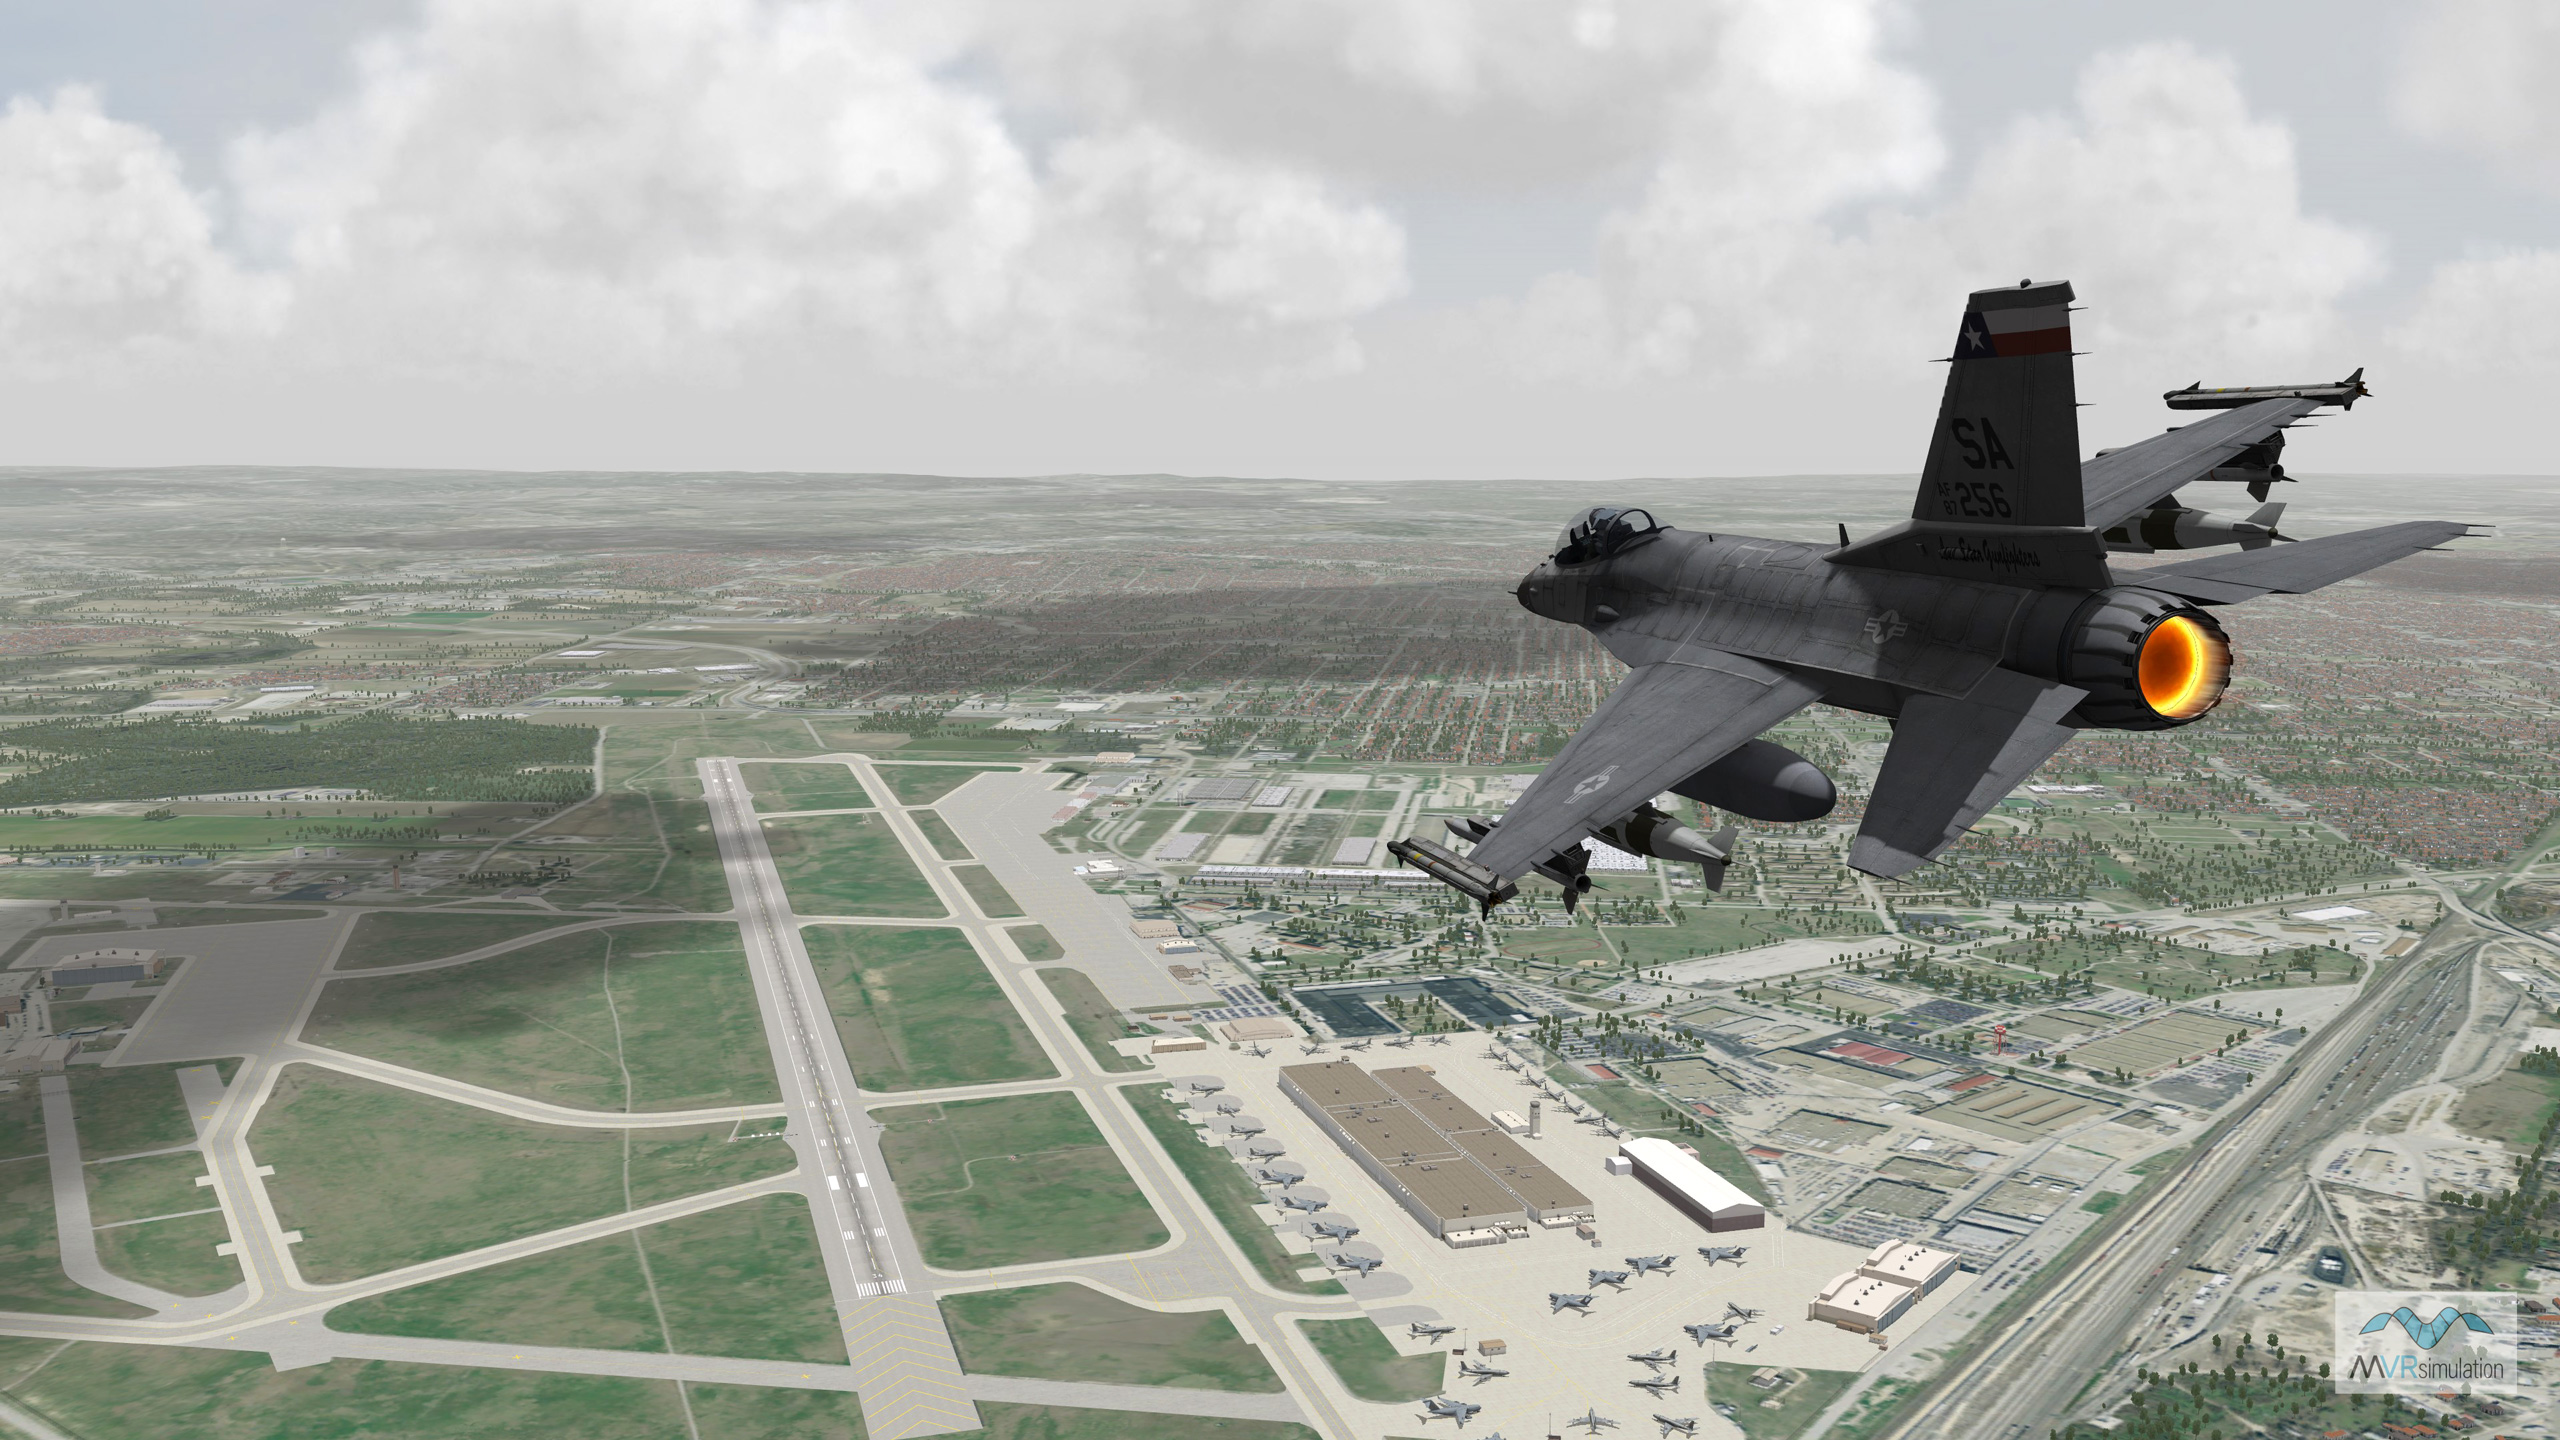 MVRsimulation VRSG real-time scene of an F-16 entity in flight over virtual Kelly Field at Lackland Air Force Base.